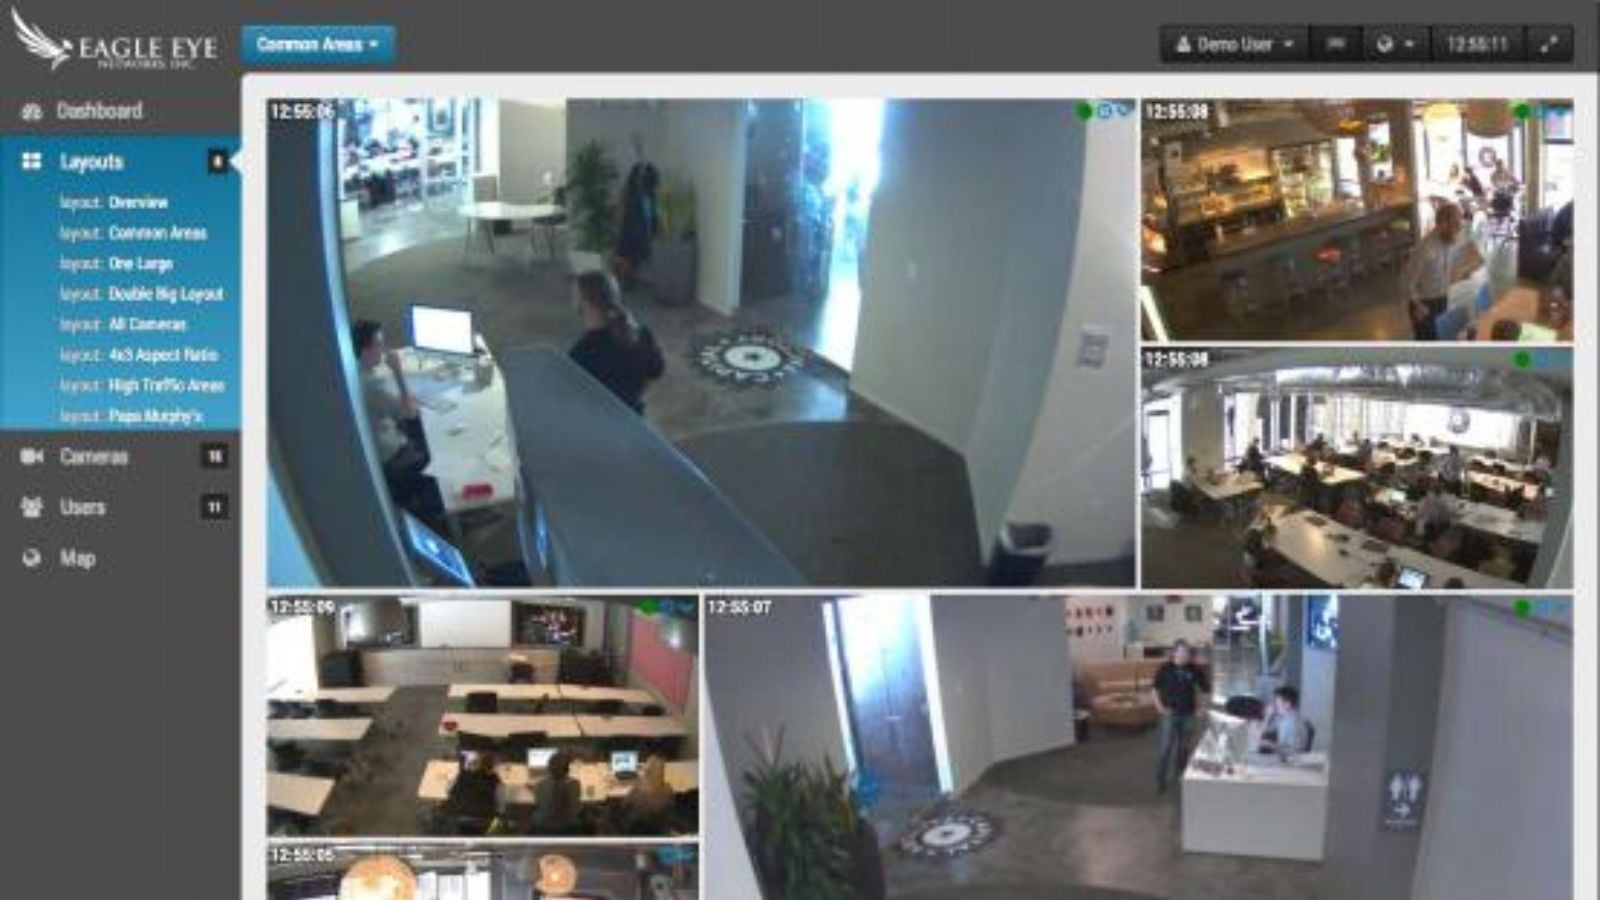 Video Surveillance for Security